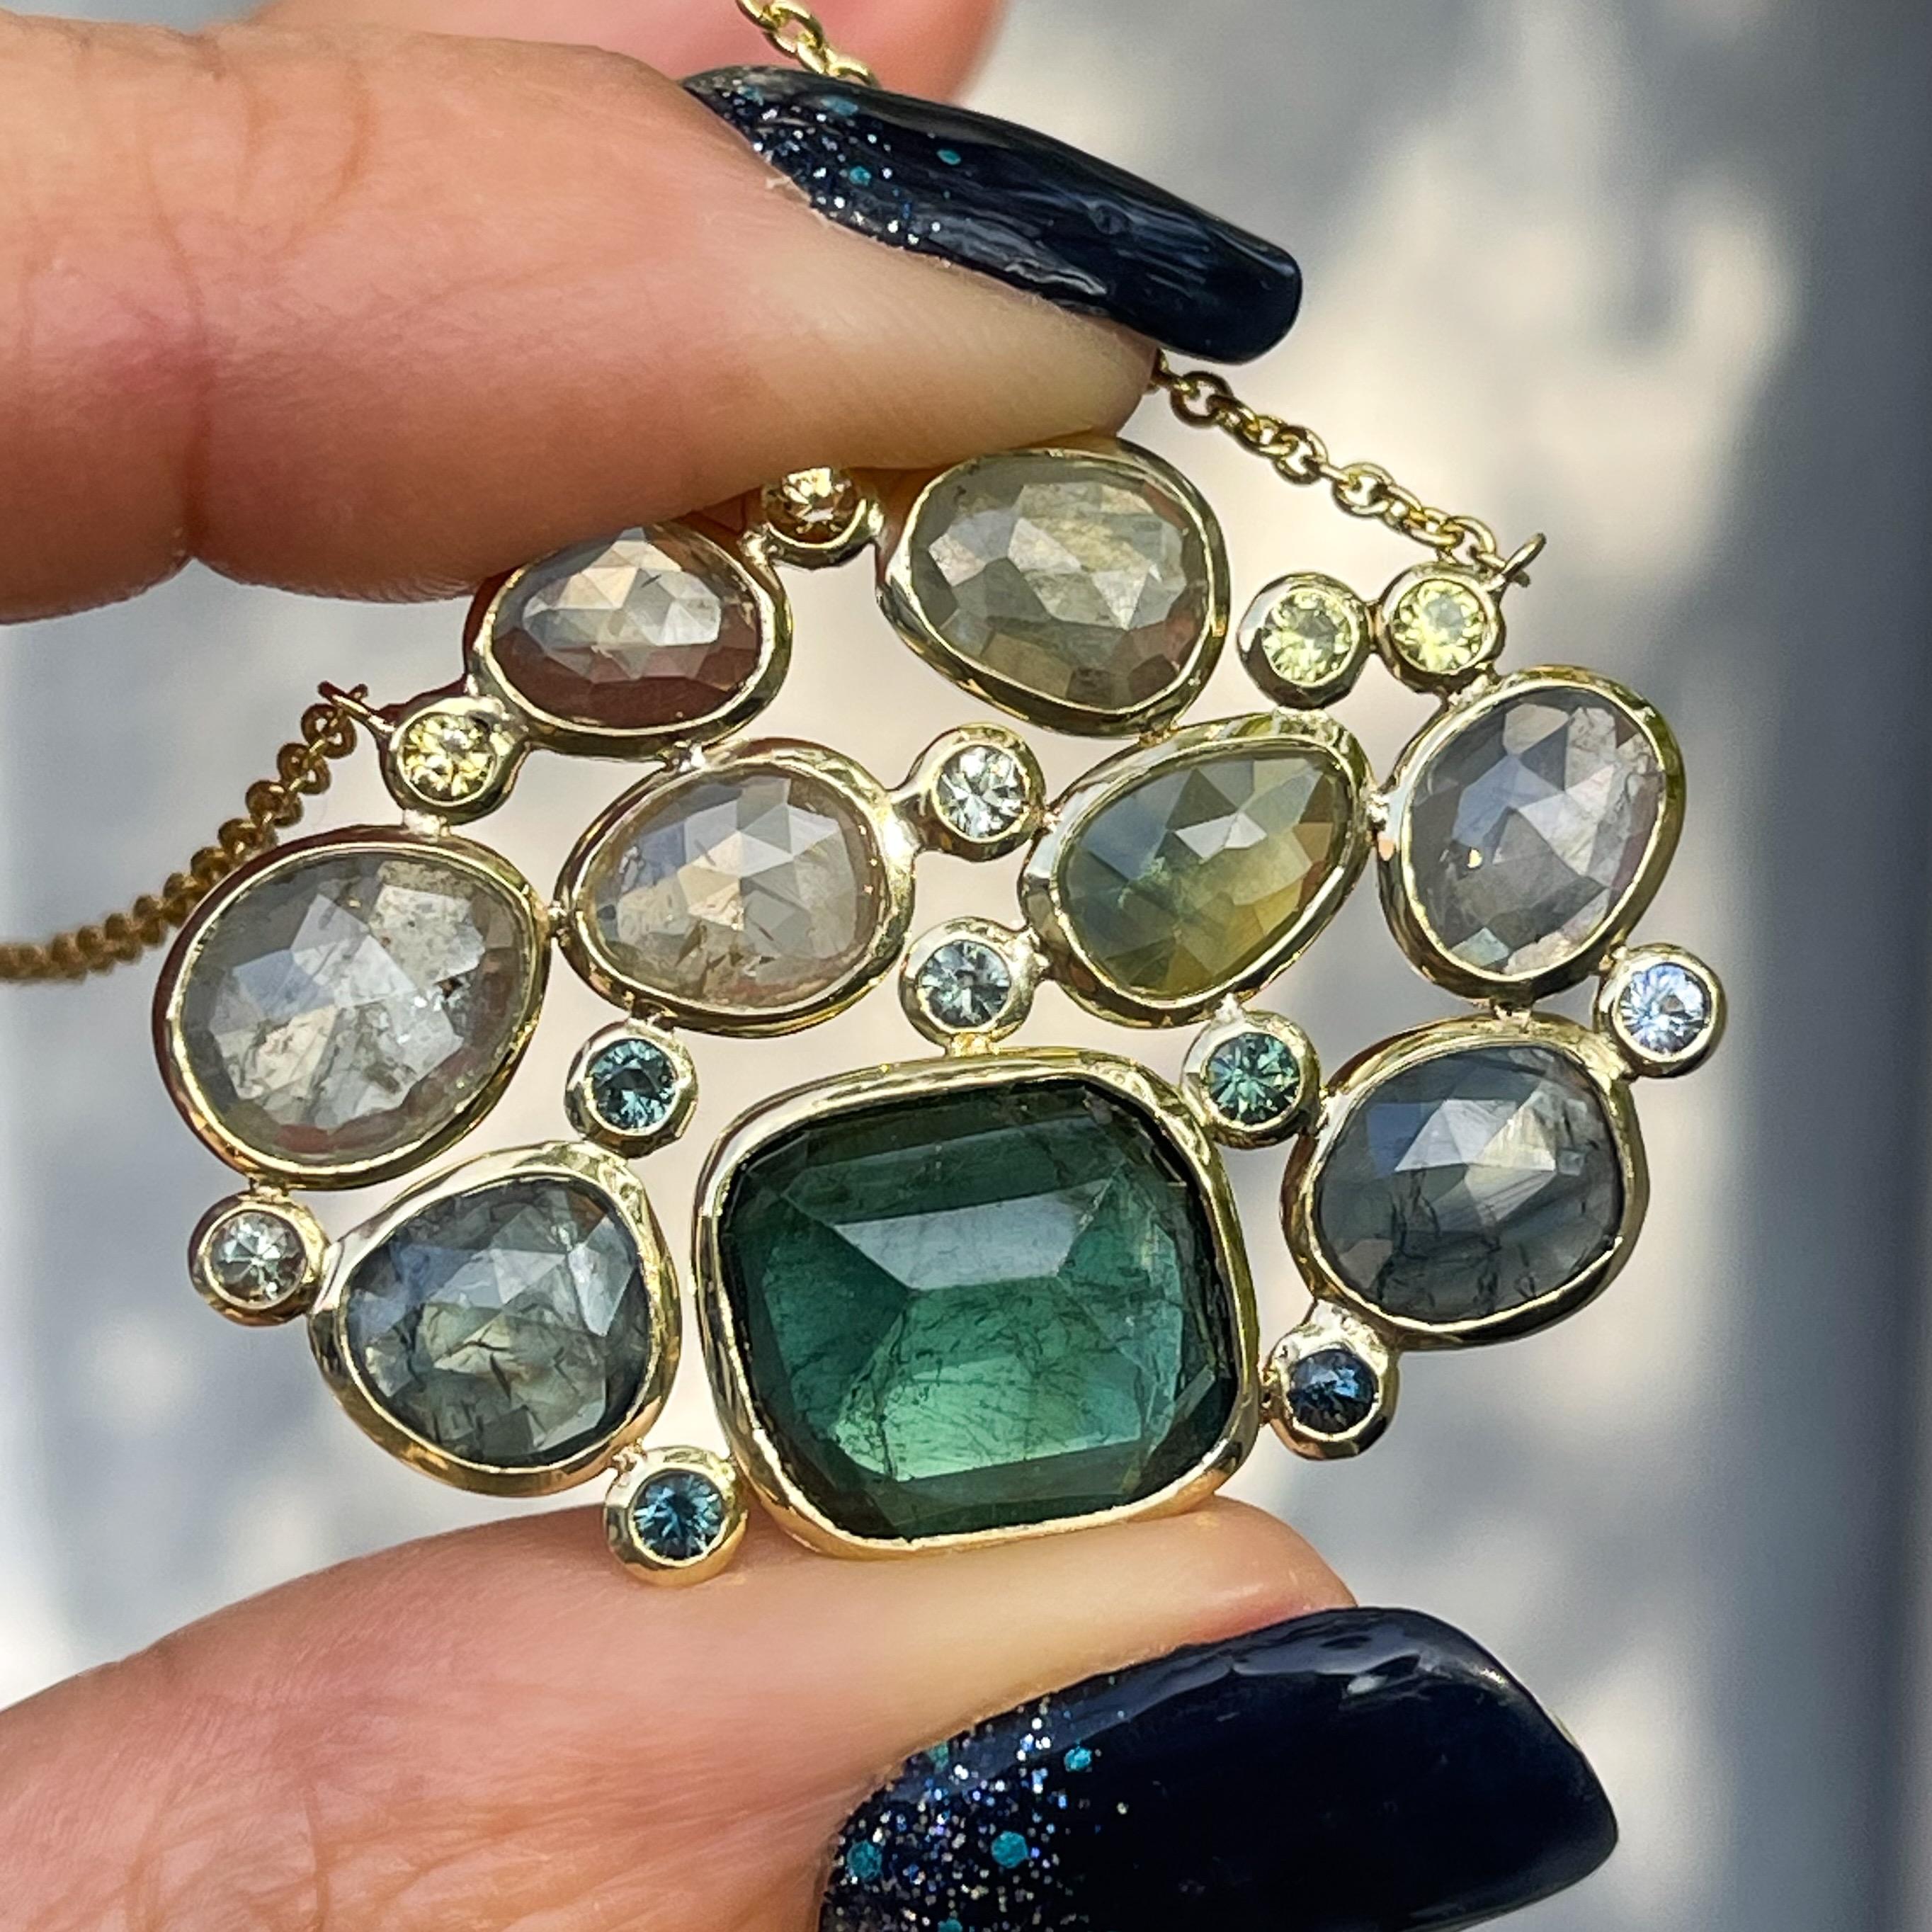 A deep teal tourmaline meets a tapestry of green sapphires in this tourmaline and sapphire necklace. Both the brilliant cut and rose cut gems draw upon nature's earthy tones, sapping its hues as though extracted directly from the forest. A